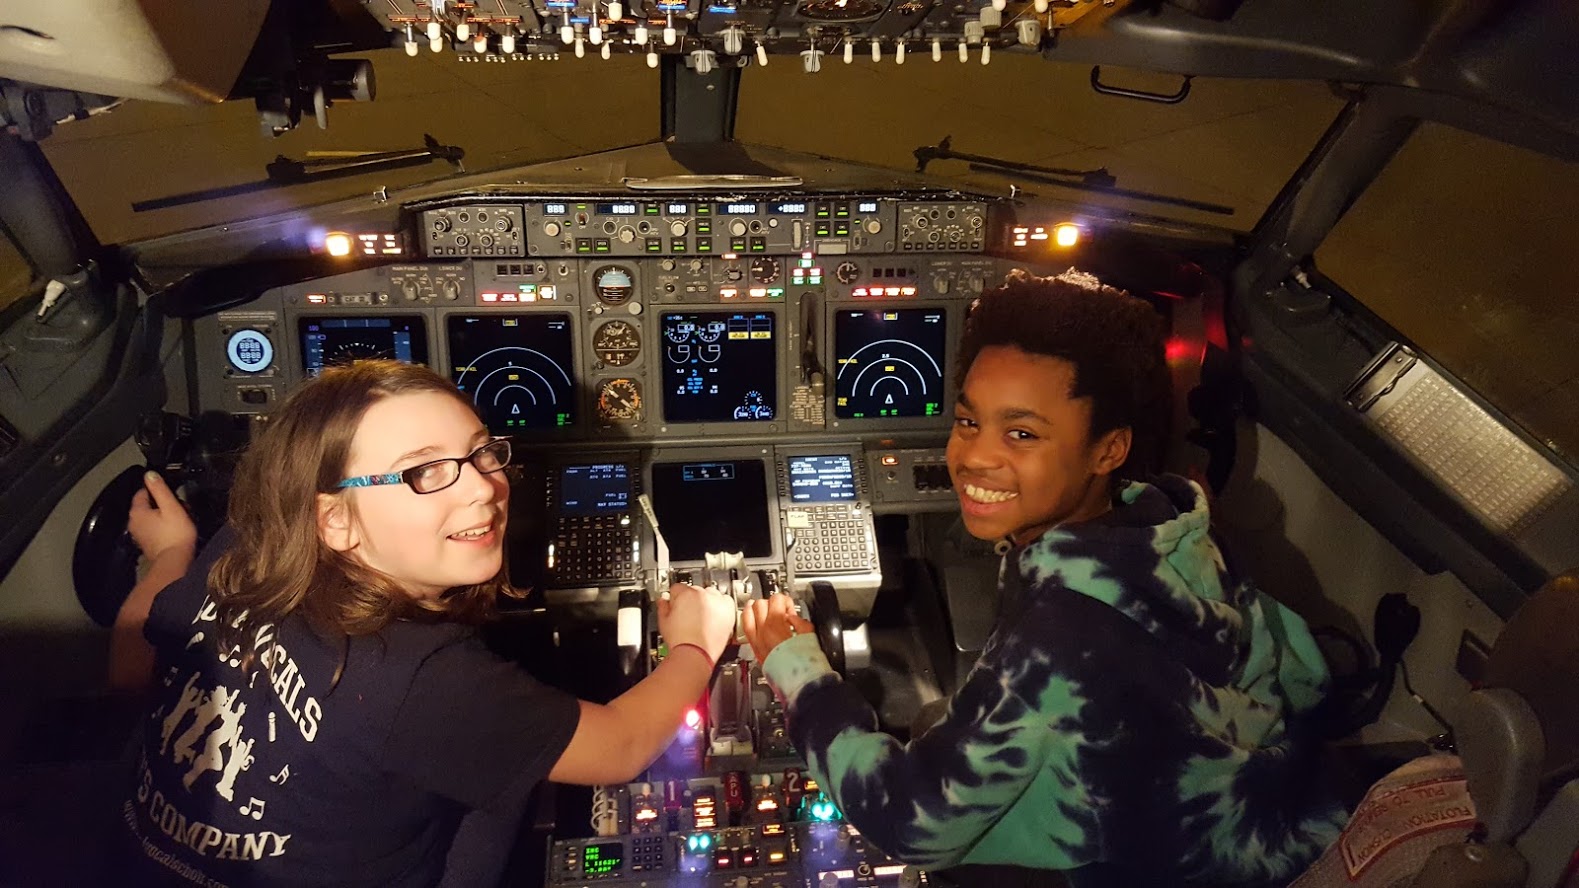 Abbie and Luke enjoying the view of the cockpit.